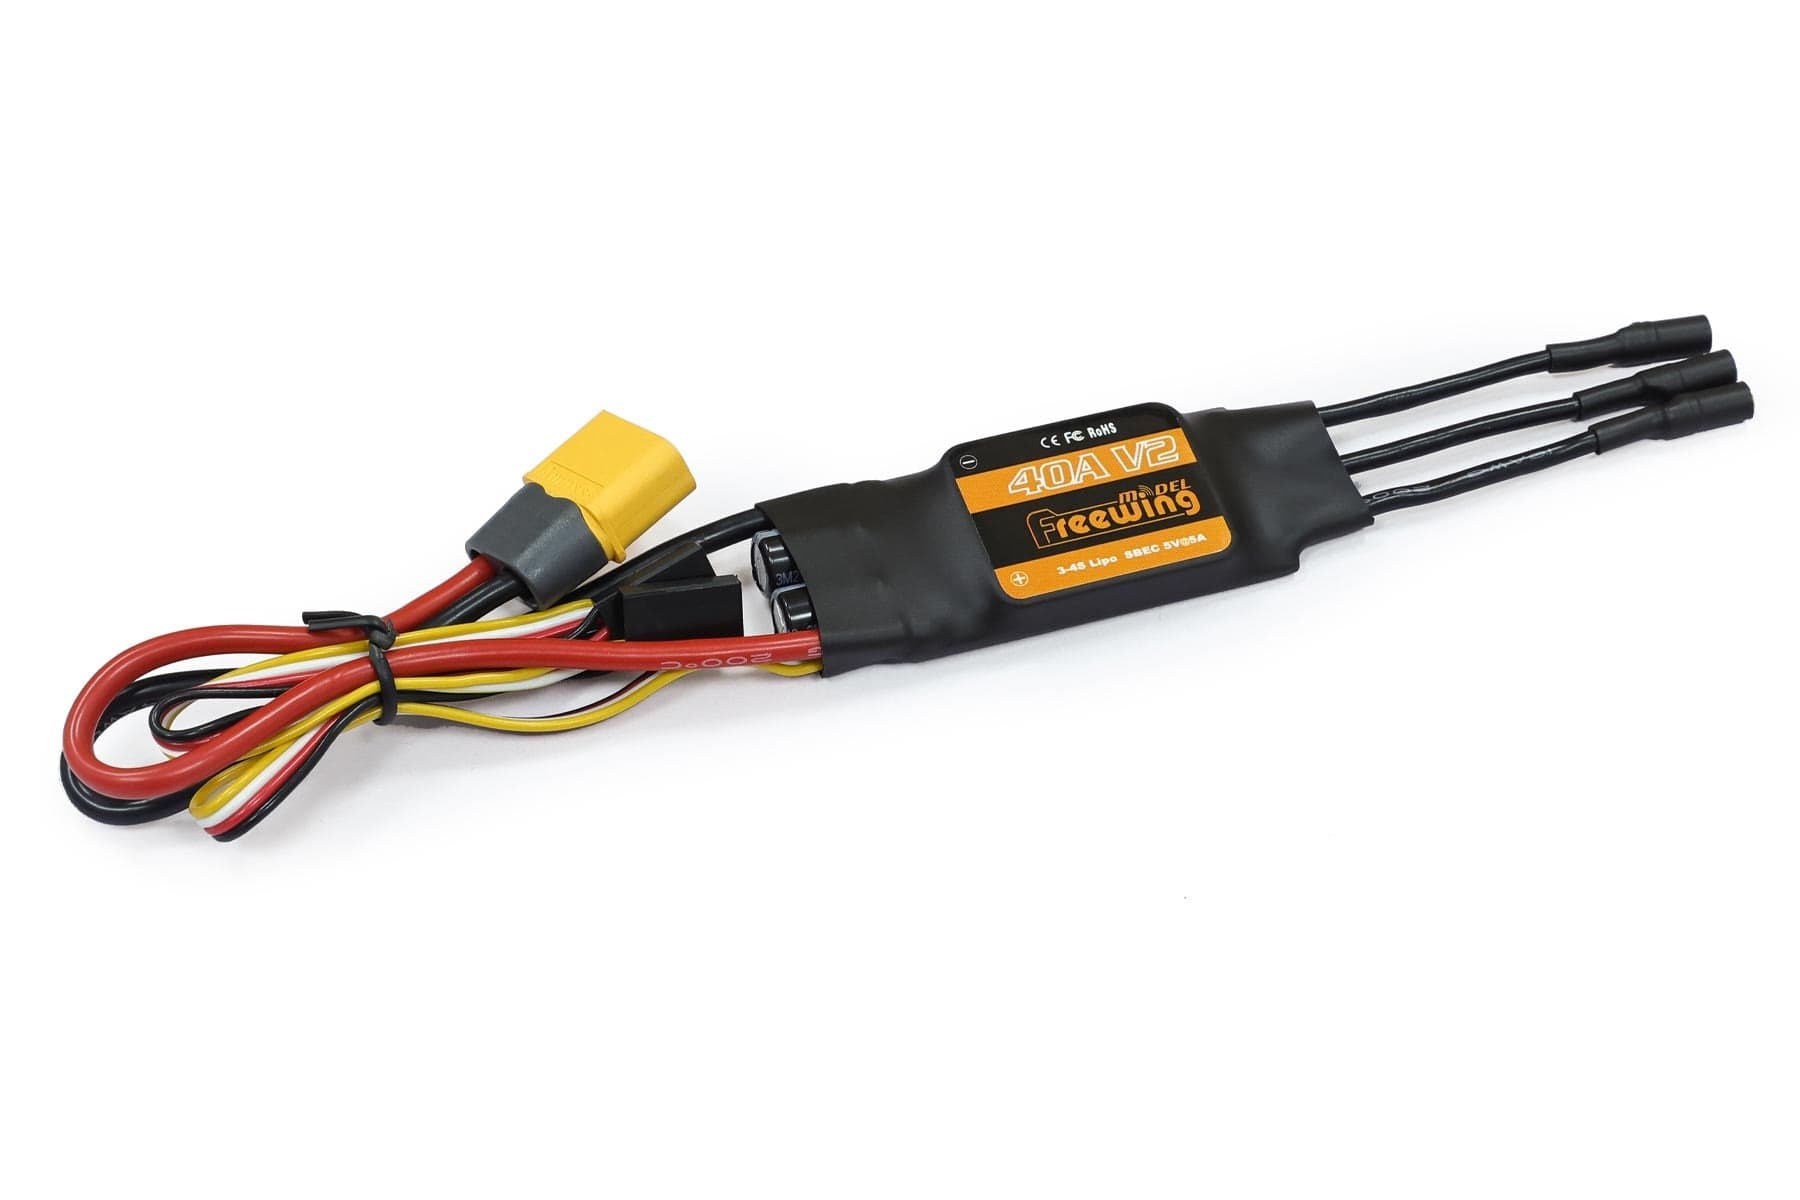 Freewing 40A ESC with Thrust Reversing F22D002003